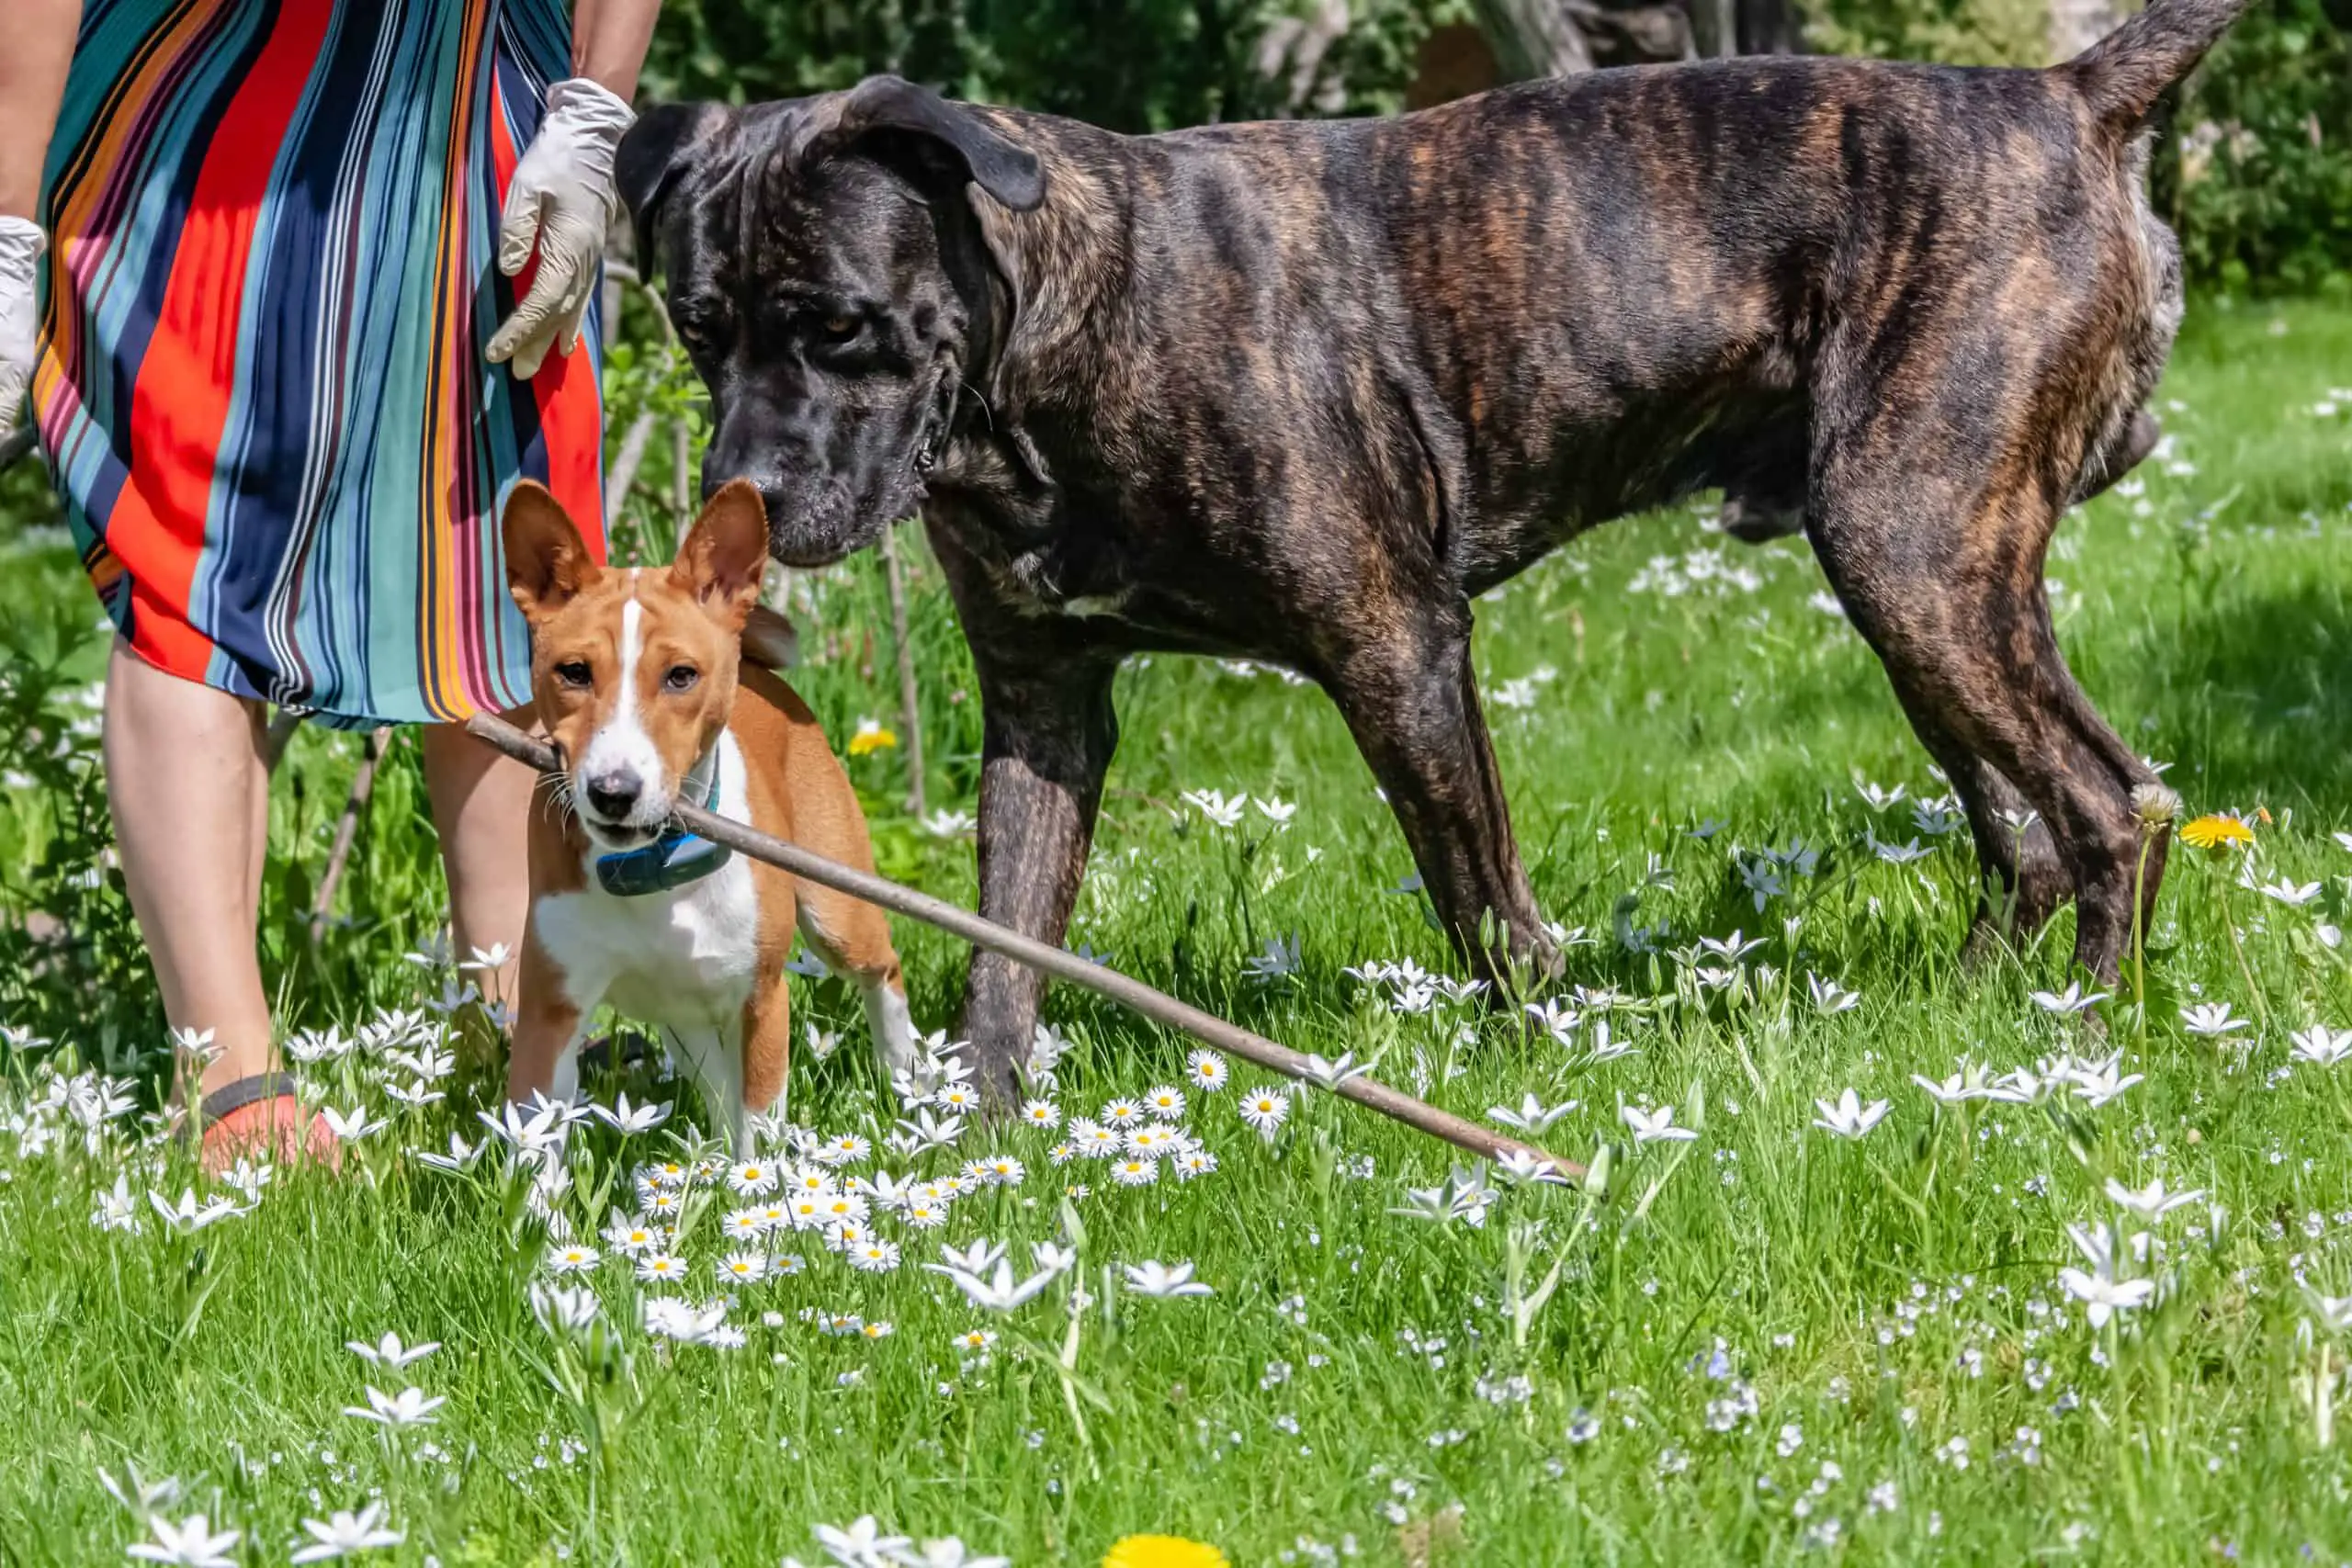 The Basenji and Cane-corso dog playing in the garden safely